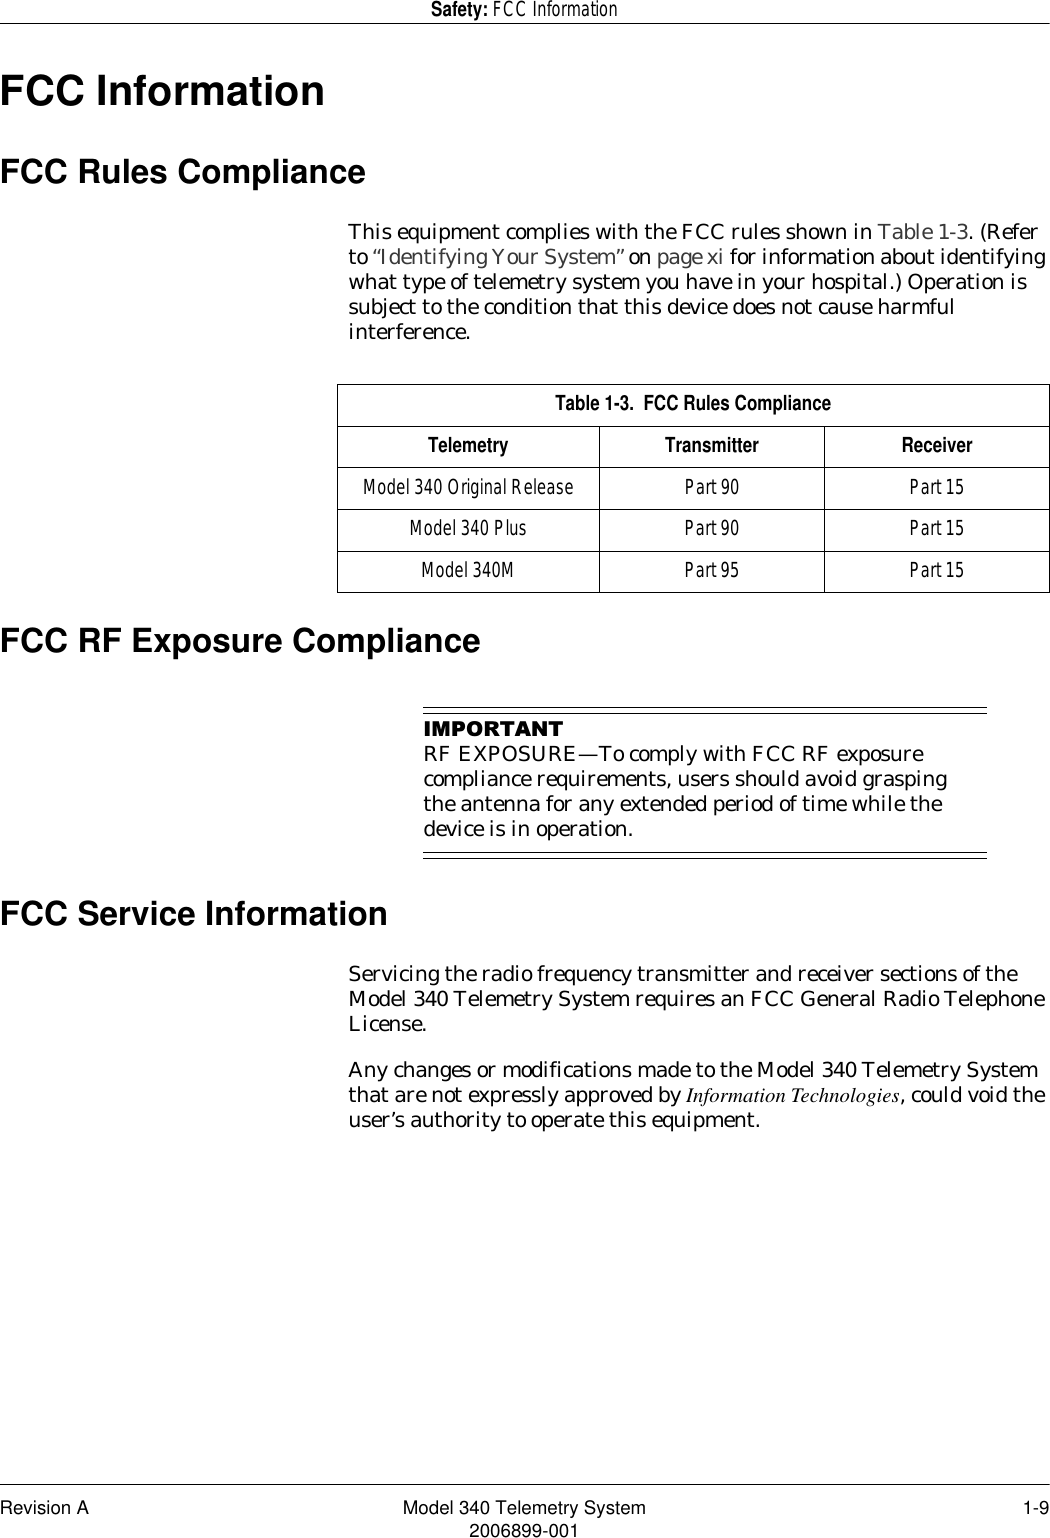 Revision A Model 340 Telemetry System 1-92006899-001Safety: FCC InformationFCC InformationFCC Rules ComplianceThis equipment complies with the FCC rules shown in Table 1-3. (Refer to “Identifying Your System” on page xi for information about identifying what type of telemetry system you have in your hospital.) Operation is subject to the condition that this device does not cause harmful interference.FCC RF Exposure Compliance,03257$17RF EXPOSURE—To comply with FCC RF exposure compliance requirements, users should avoid grasping the antenna for any extended period of time while the device is in operation.FCC Service InformationServicing the radio frequency transmitter and receiver sections of the Model 340 Telemetry System requires an FCC General Radio Telephone License.Any changes or modifications made to the Model 340 Telemetry System that are not expressly approved by Information Technologies, could void the user’s authority to operate this equipment.Table 1-3.  FCC Rules ComplianceTelemetry Transmitter ReceiverModel 340 Original Release Part 90 Part 15Model 340 Plus Part 90 Part 15Model 340M Part 95 Part 15